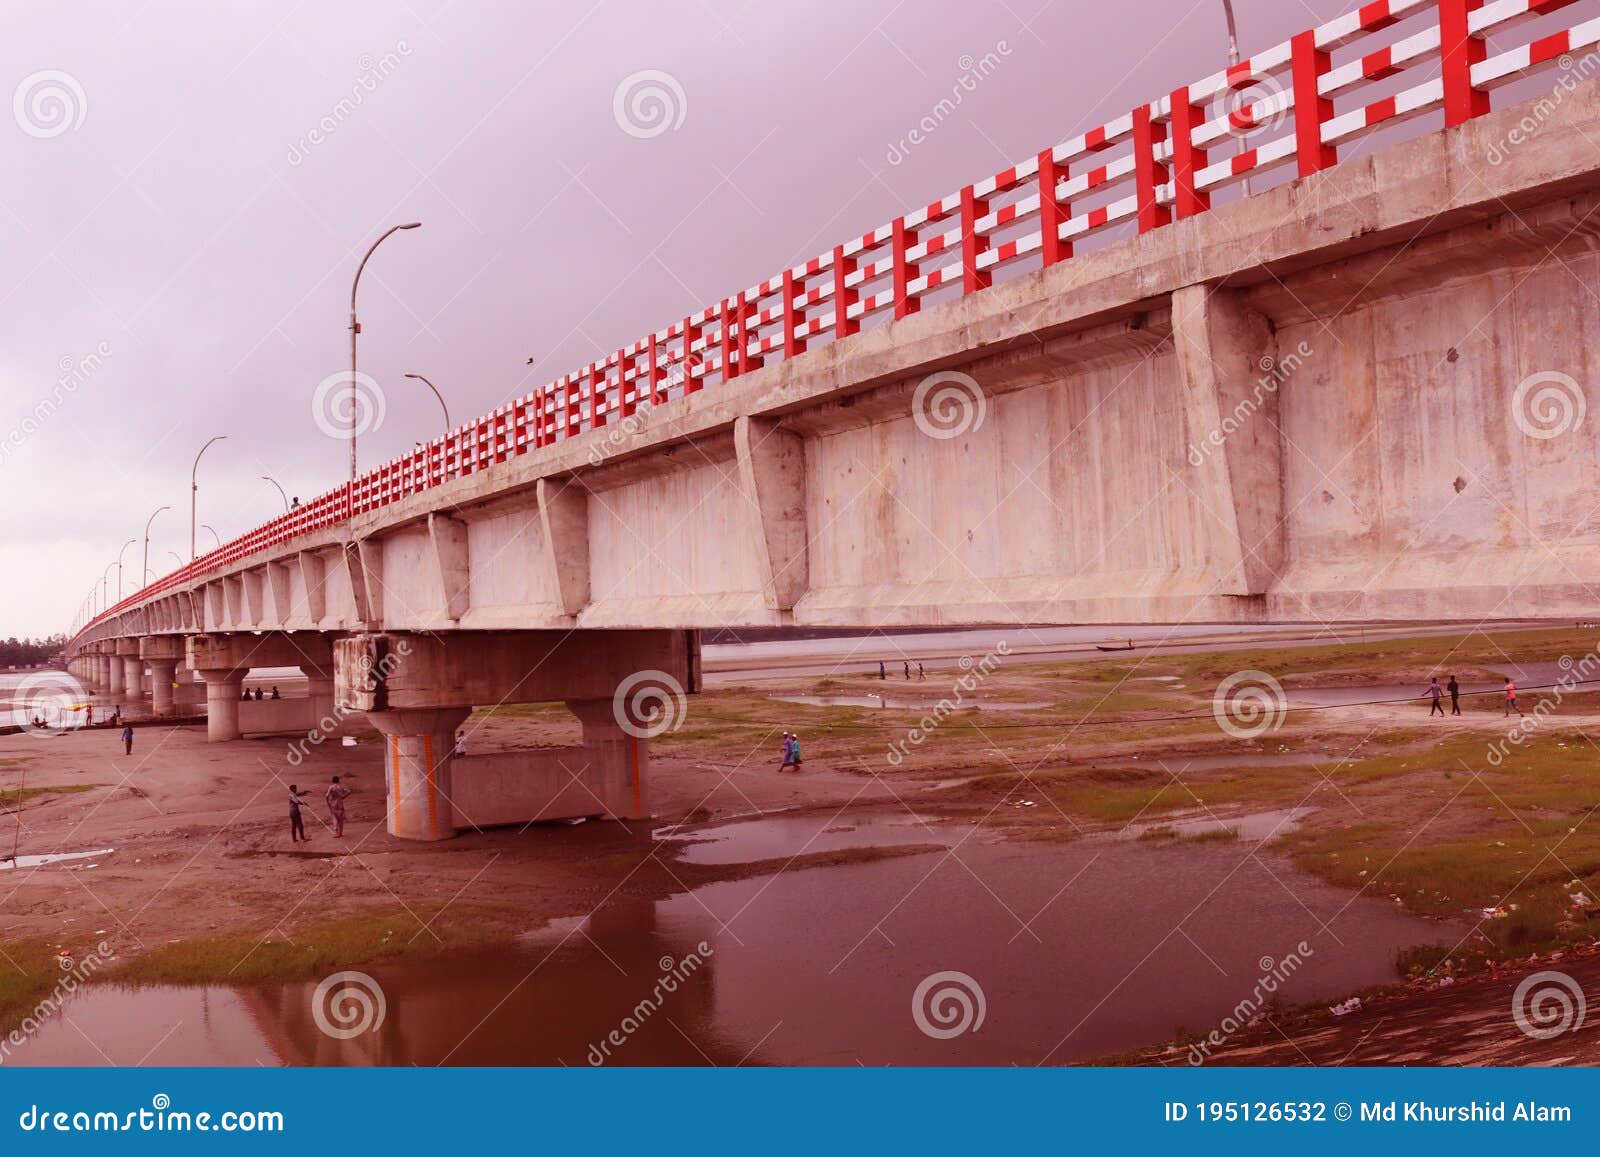 long big concrete bridge.an elevated concrete highway spanning across a dark cloudy sky.view under the grey briage in the city.